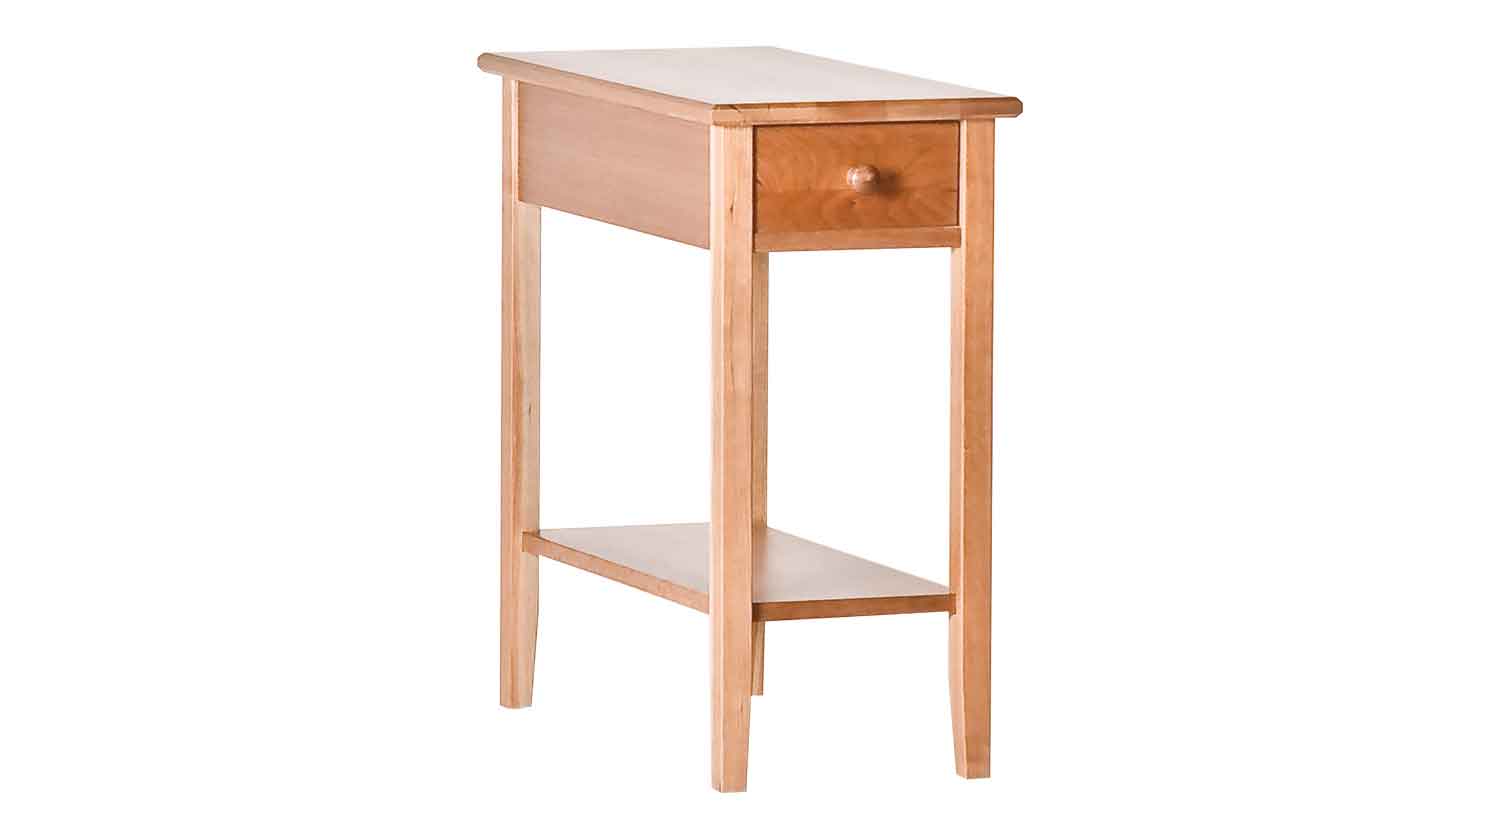 delightful unique small accent tables outdoor storage glass for tall cabinet room target antique modern and threshold round gold white living furniture kijiji benc table ott with